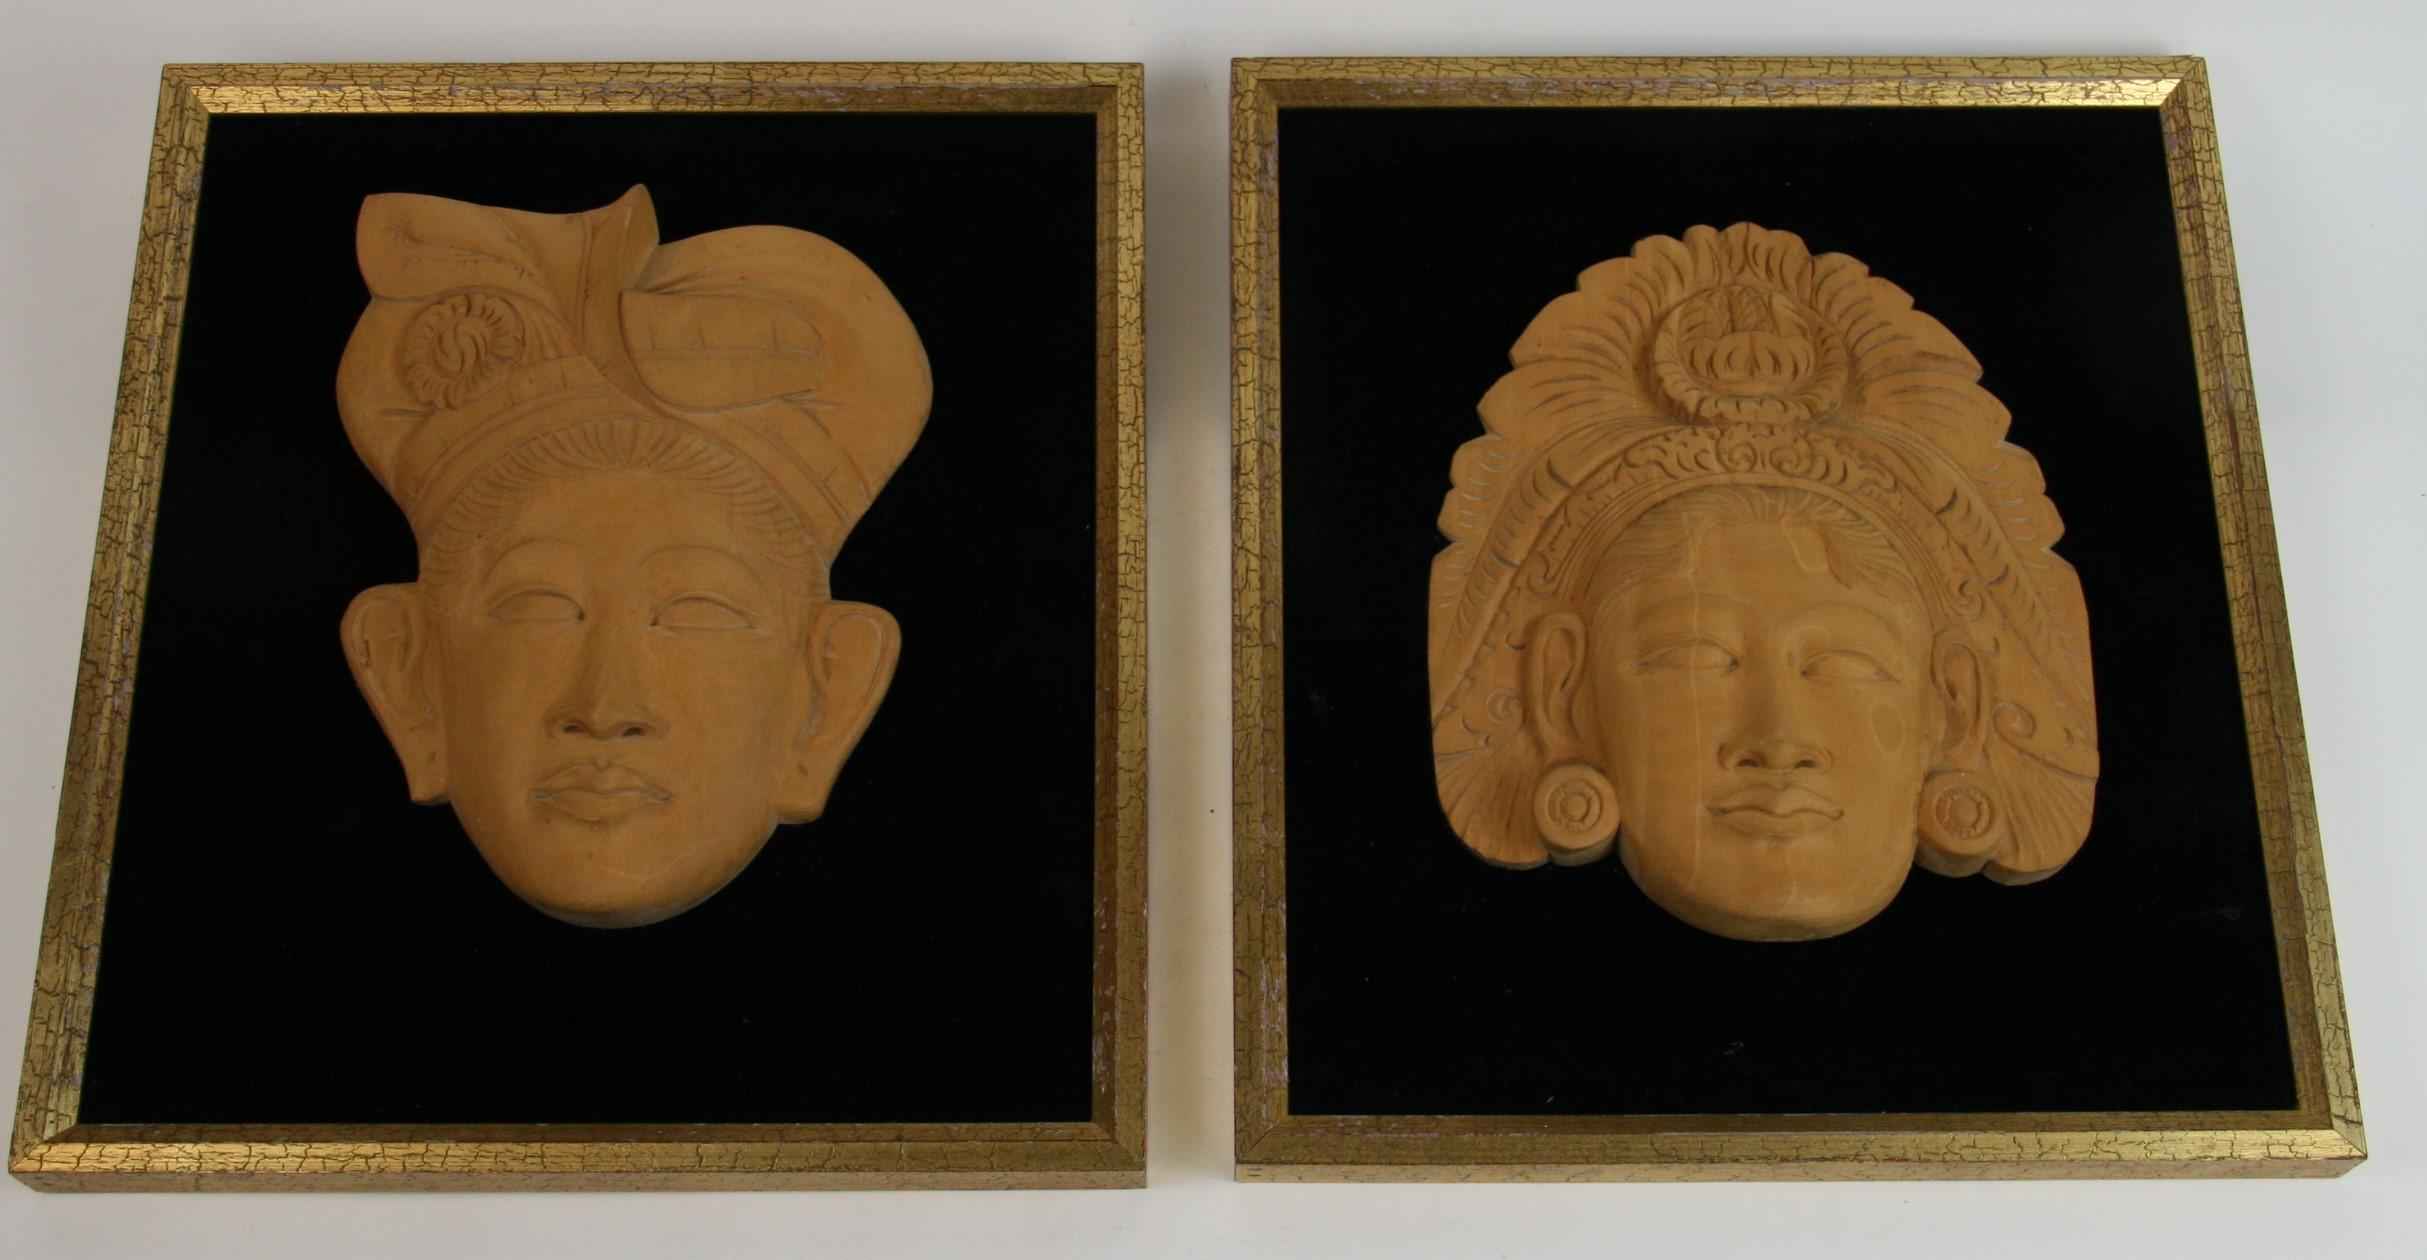 Pair of  Wood Figural Carvings Mounted in Frames  - Sculpture by Unknown